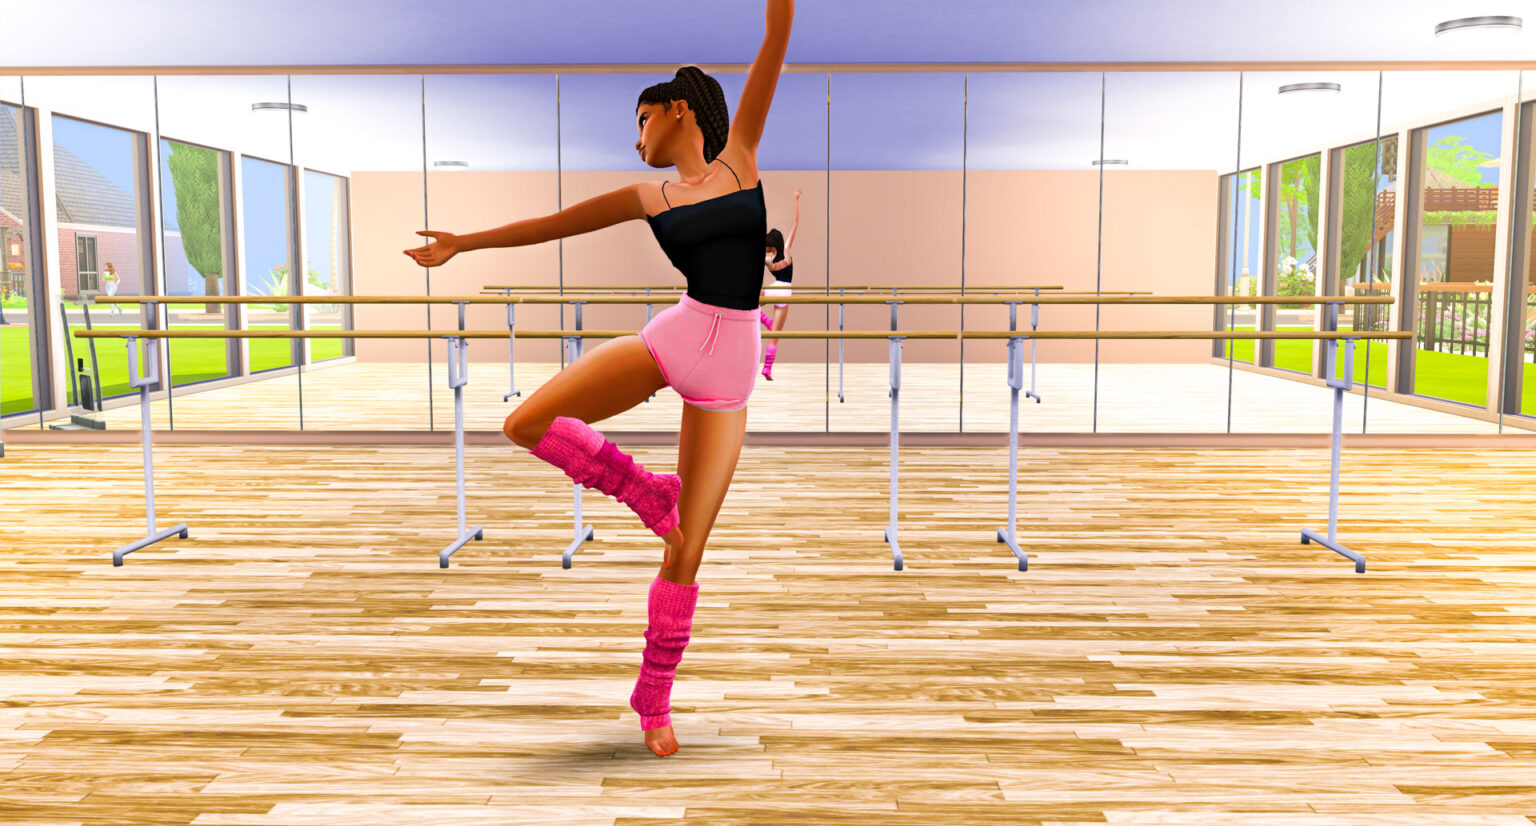 sims 4 dance animations how to